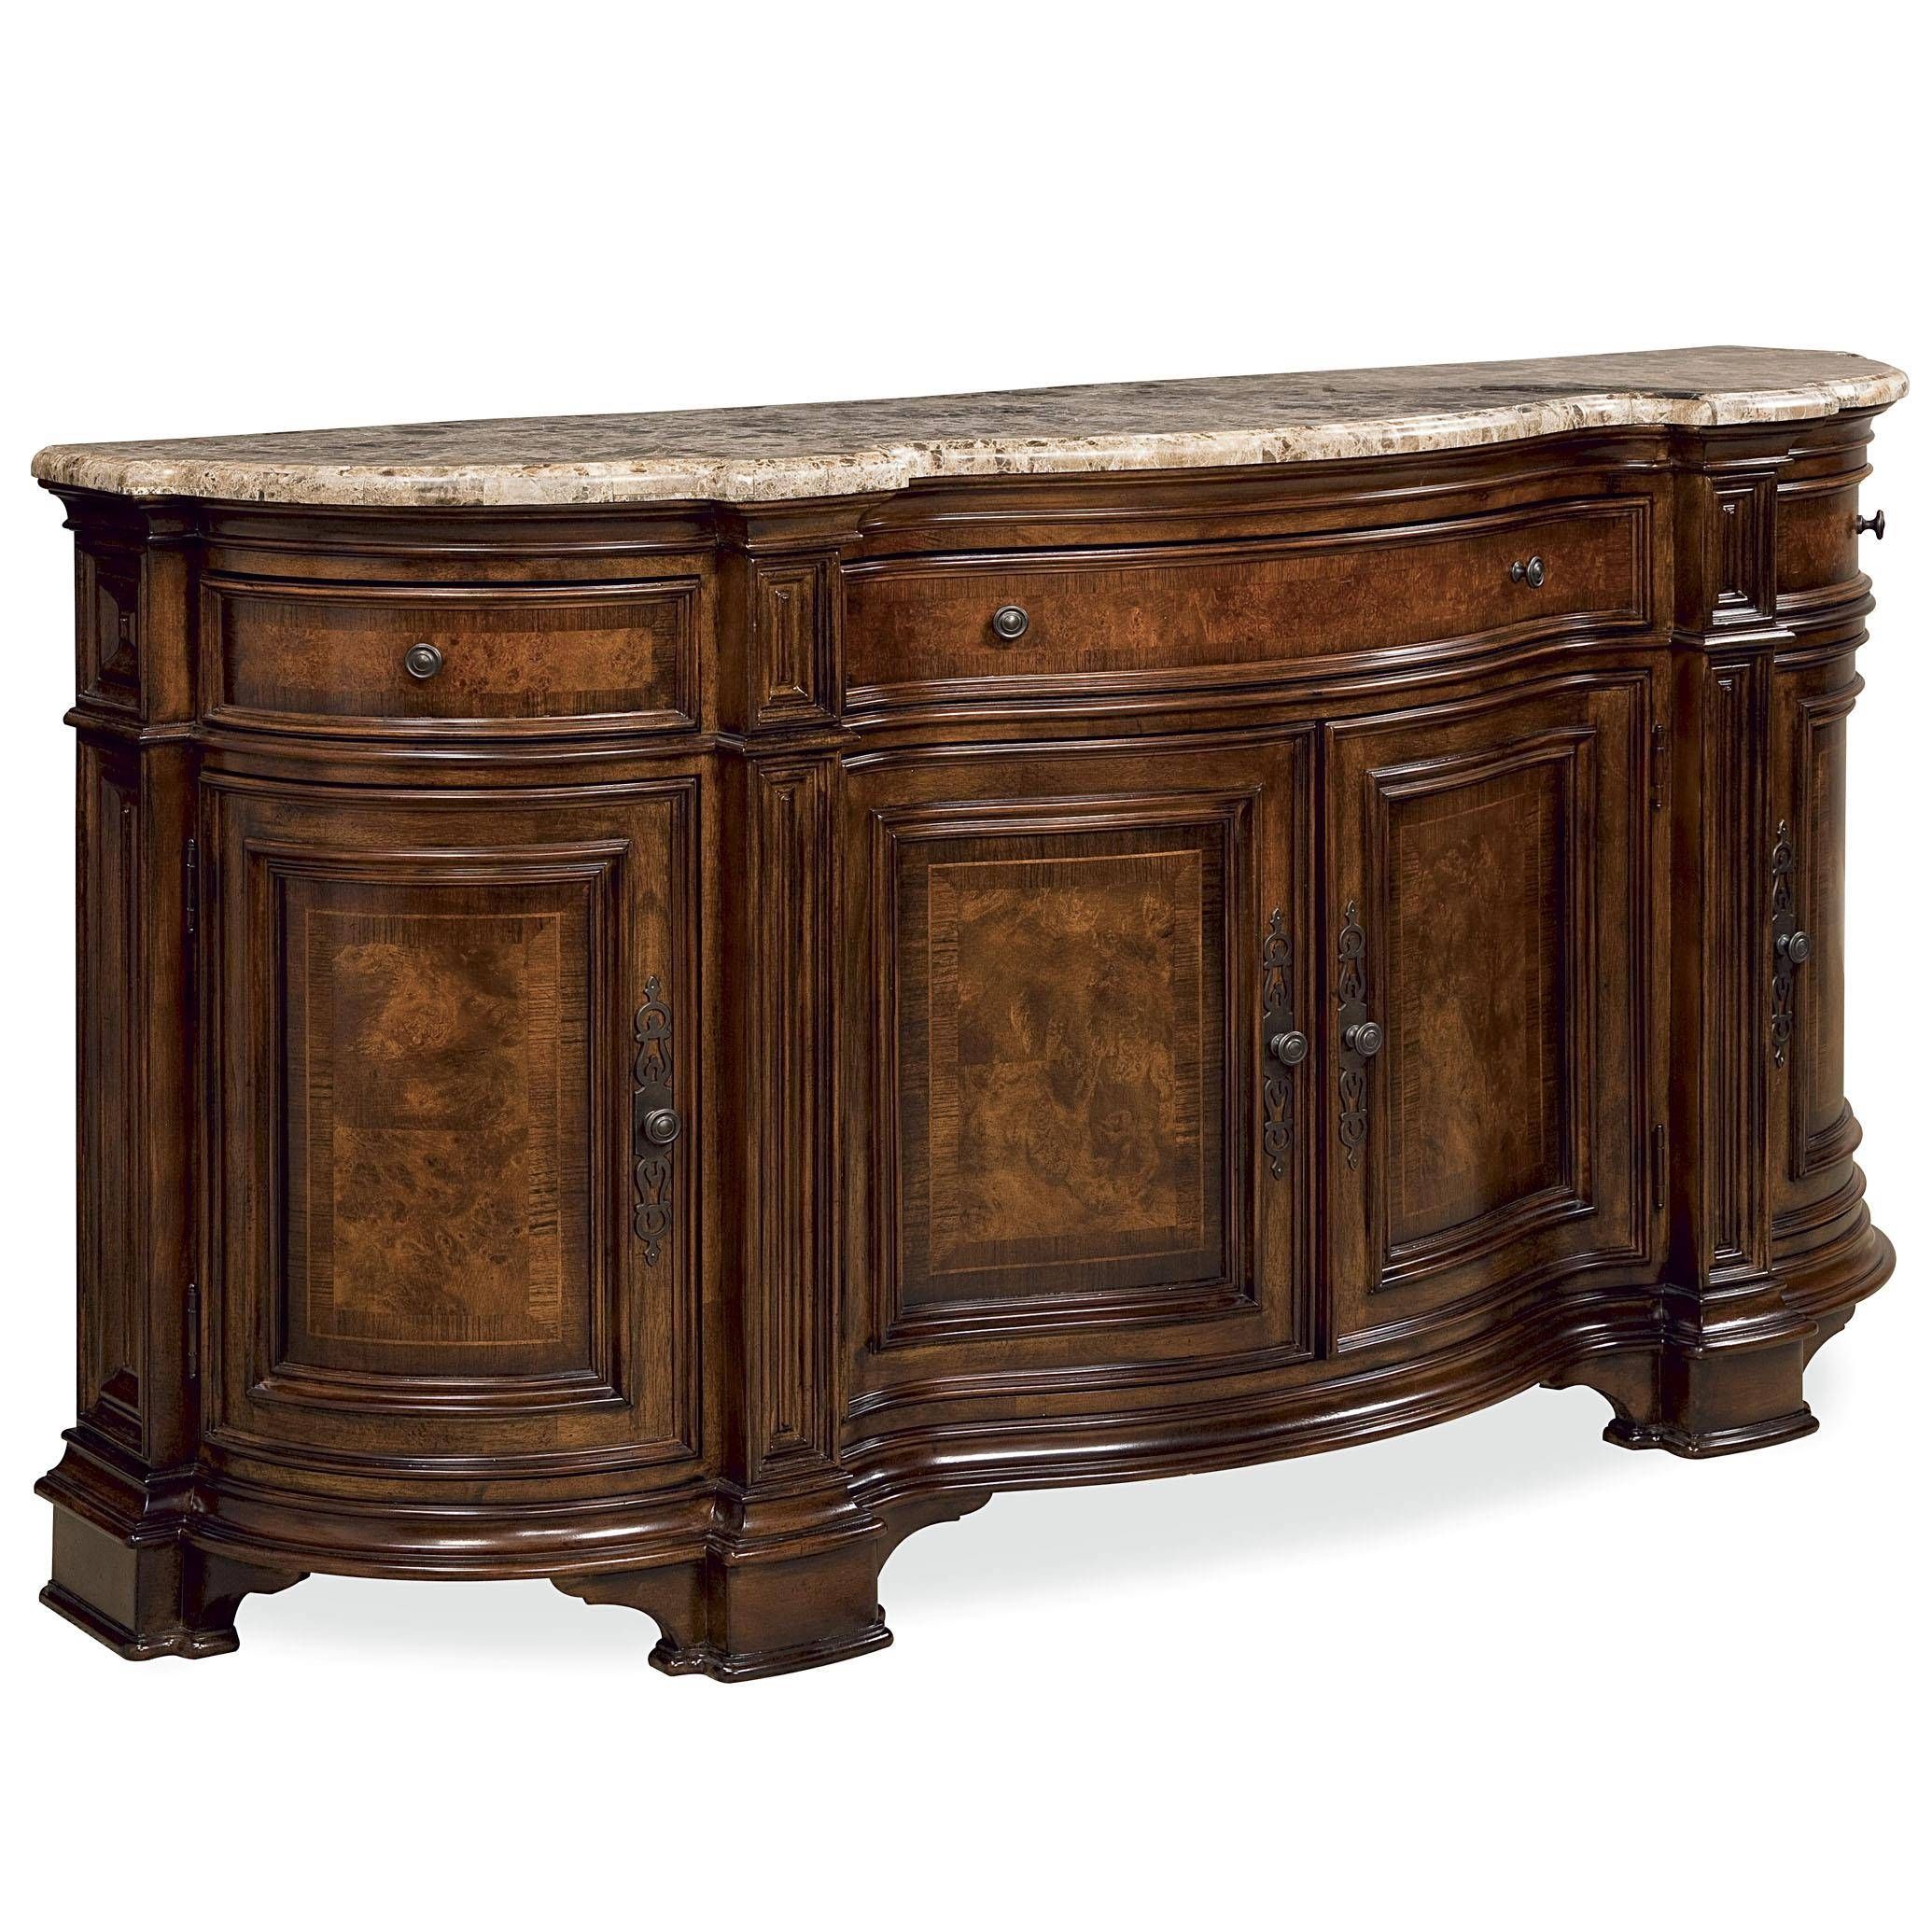 Universal Villa Cortina Sideboard Credenza With Marble Top Intended For Marble Top Sideboards (View 11 of 15)